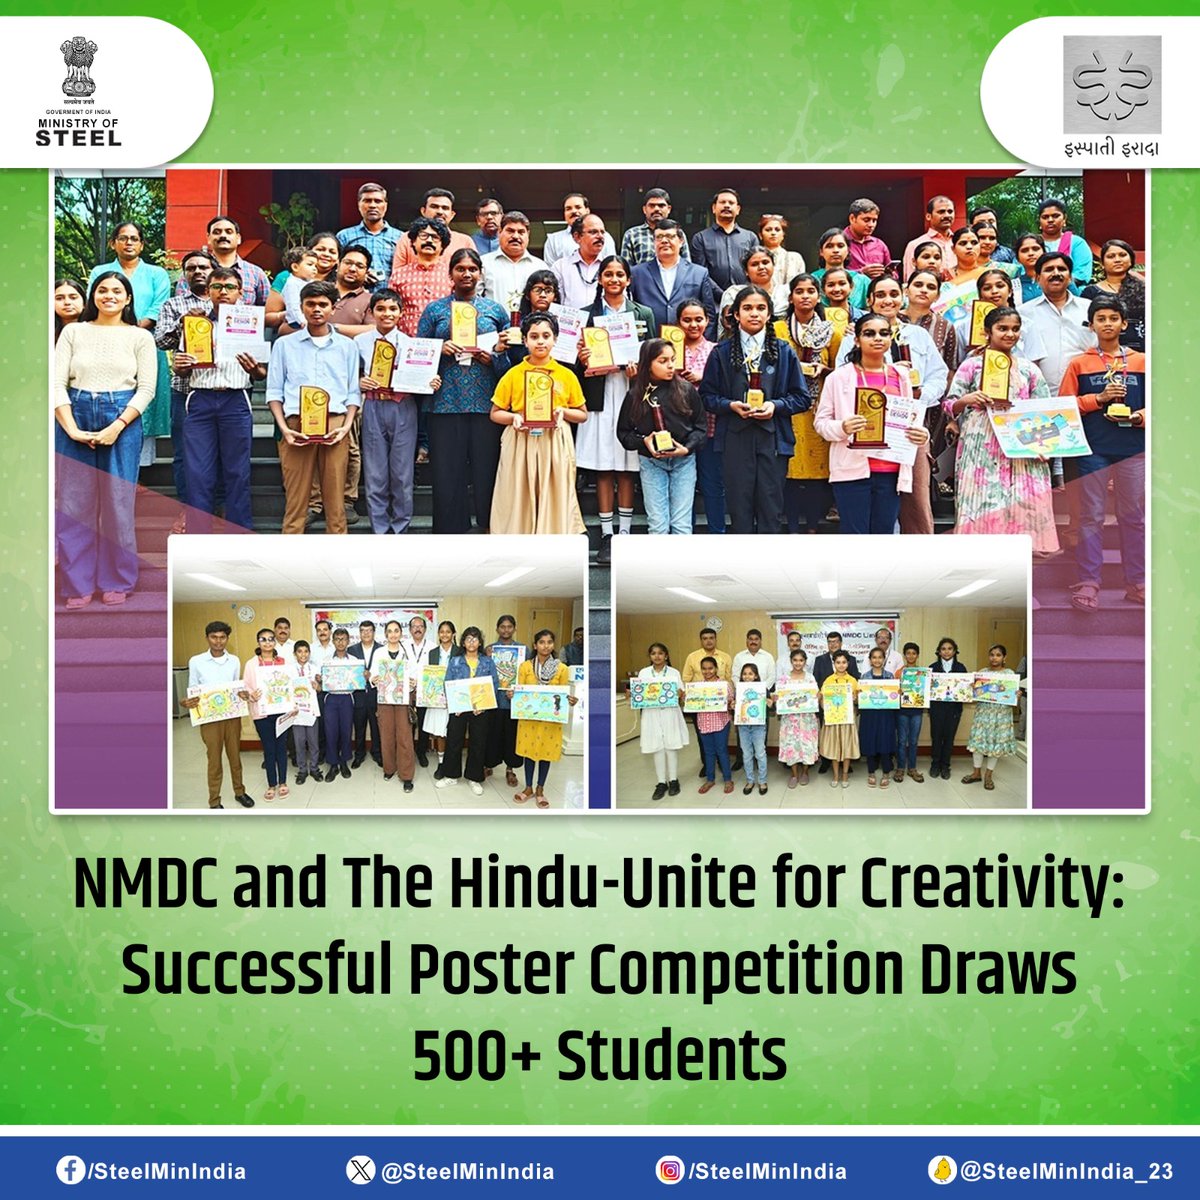 #NMDC joins hands with #TheHindu for a #PosterCompetition, engaging 500+ students from 72 schools. Kudos to the winners! Shri Satyendra Rai, Executive Director (P&A), applauded their efforts in promoting Swachhata.🎨🏆

#NMDCPosterCompetition #SwachhataEfforts